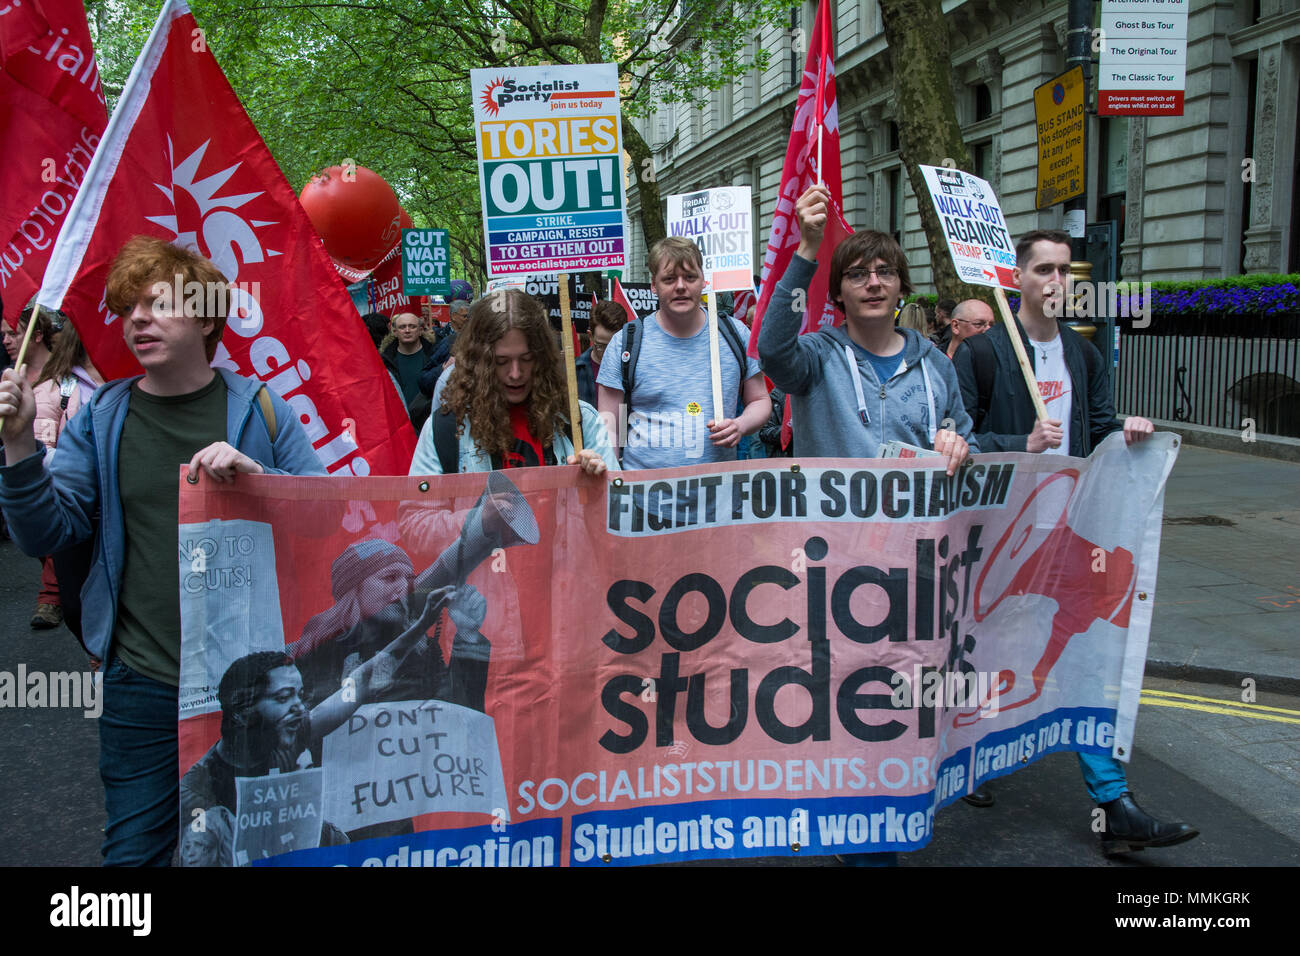 London, UK. 12th May, 2018. TUC March and Rally. Thousands march through London to demand 'A New Deal for Working People' in this demonstration organised by the Trades Union Congress. Marchers formed up at Victoria Embankment and marched to their rally in Hyde Park.  Credit: Stephen Bell/Alamy Live News Stock Photo